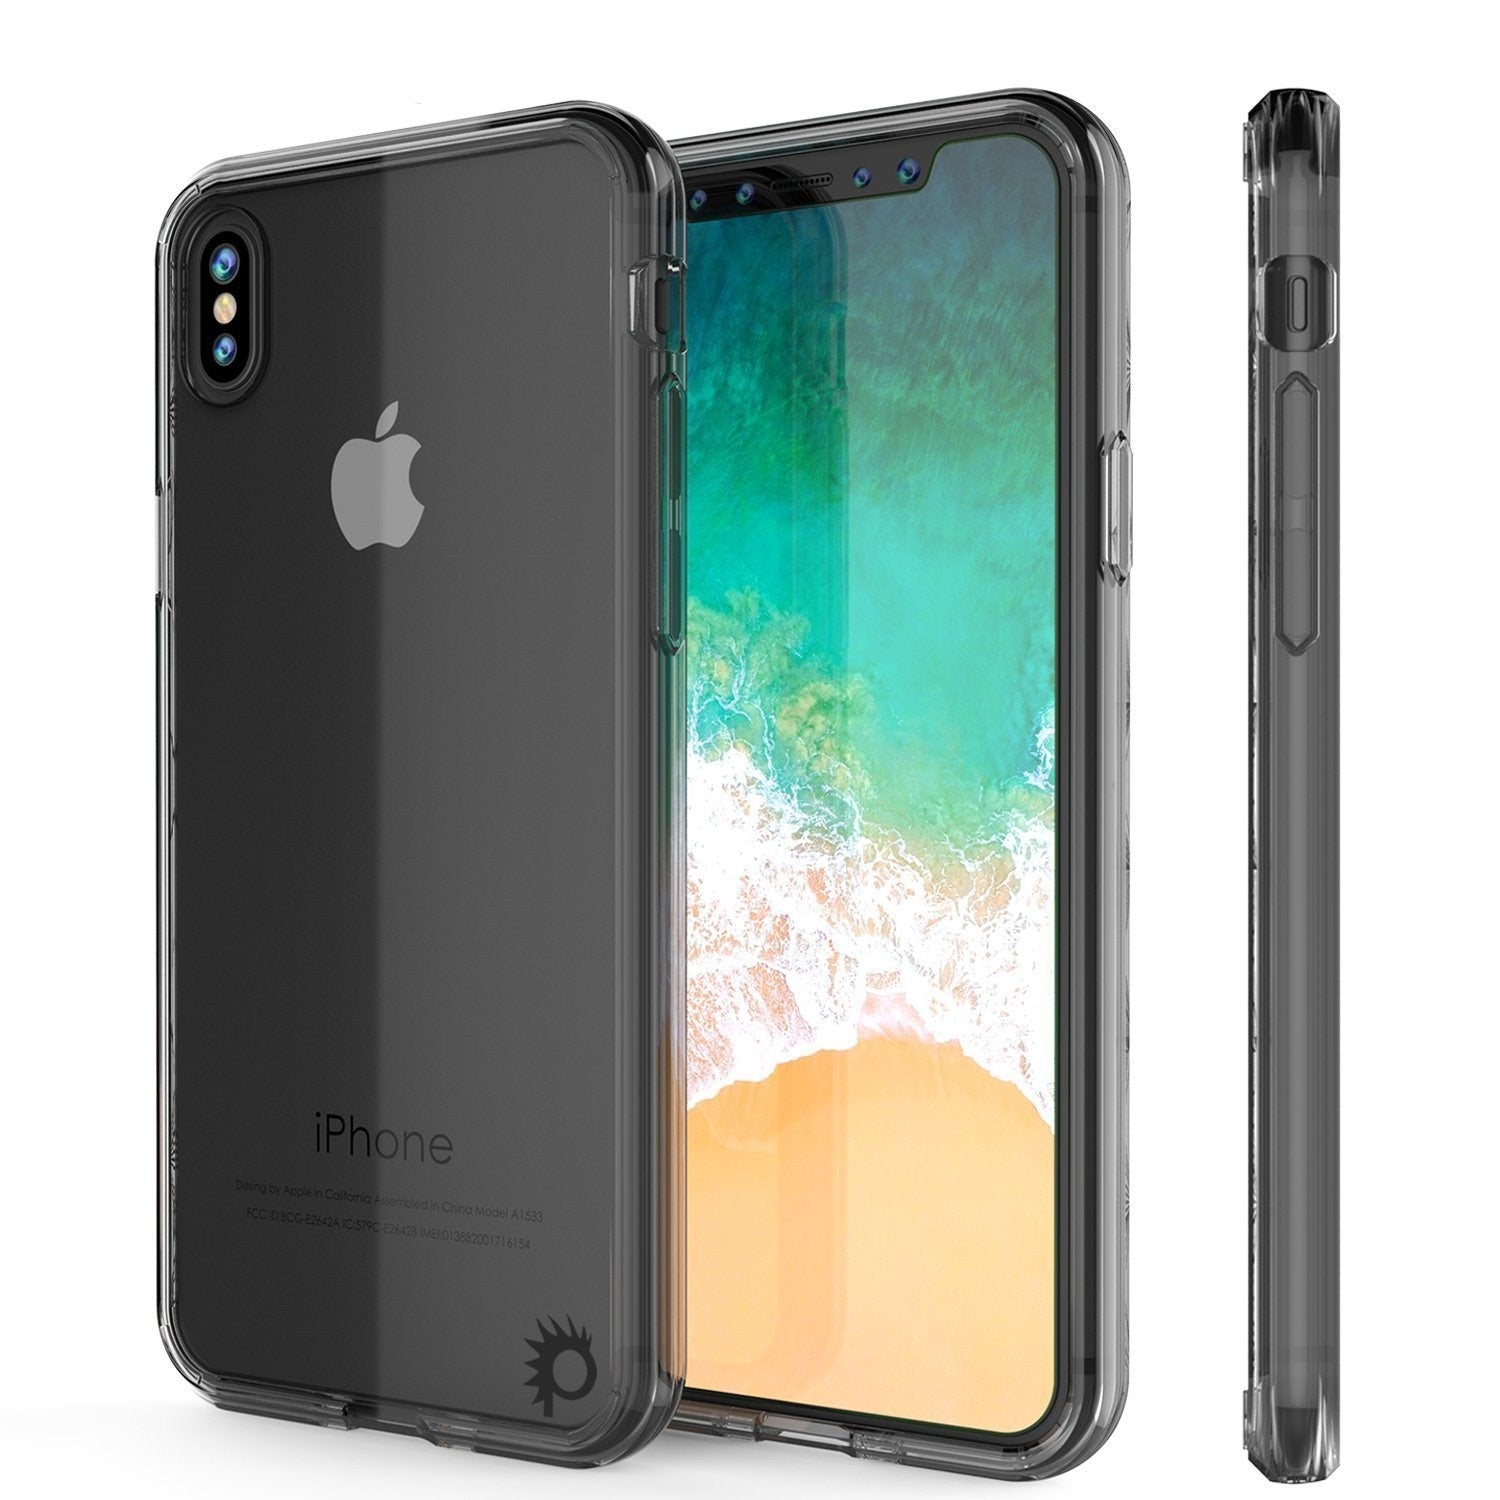 iPhone XR Case, PUNKcase [Lucid 2.0 Series] [Slim Fit] Armor Cover [Crystal-Black]